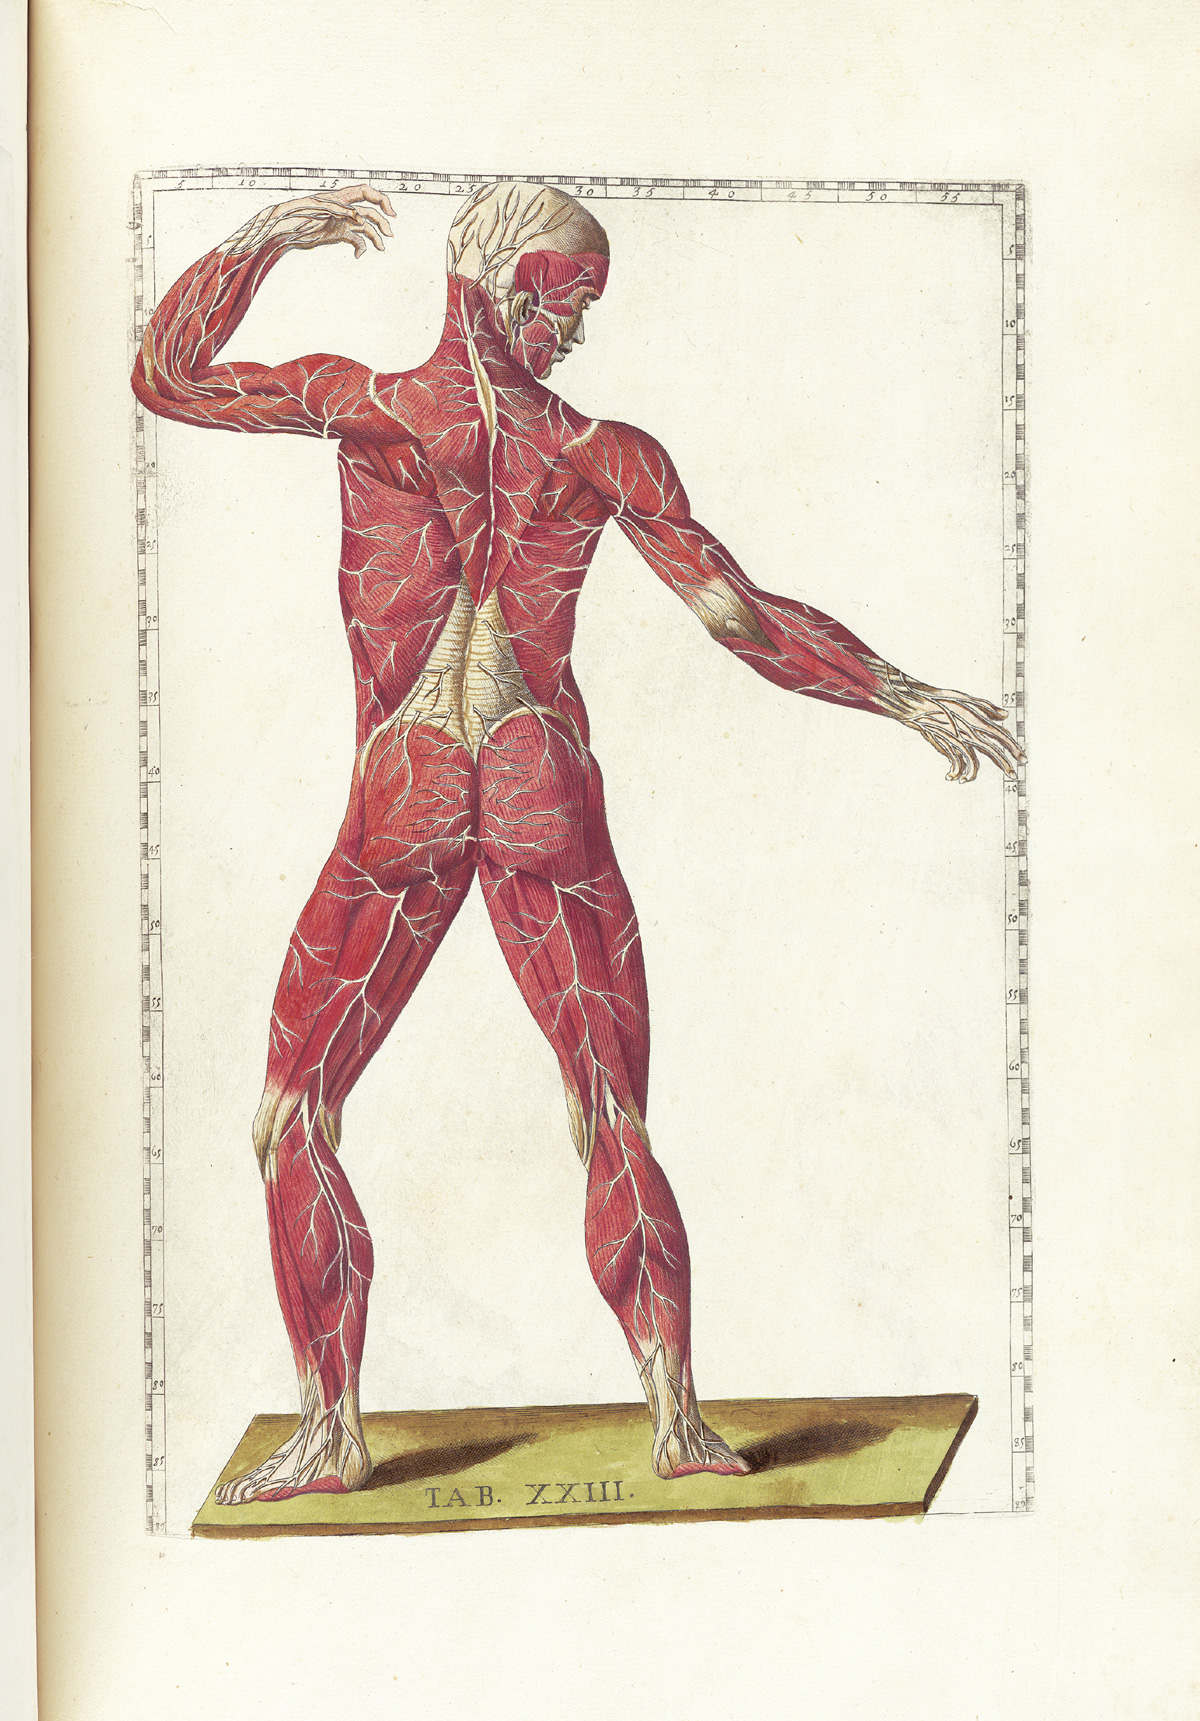 Hand-colored etching of a standing figure facing away from the viewer with flesh removed to expose the muscles showing the pathways of the nerves, with emphasis on the nerves just below the skin; the figure is in a classical pose resembling a javelin thrower looking to the left side of the page with his left hand raised and bent at the elbow and right had extended forward; from Bartholomeo Eustachi’s Tabulae anatomicae, NLM Call no.: WZ 260 E87t 1783.